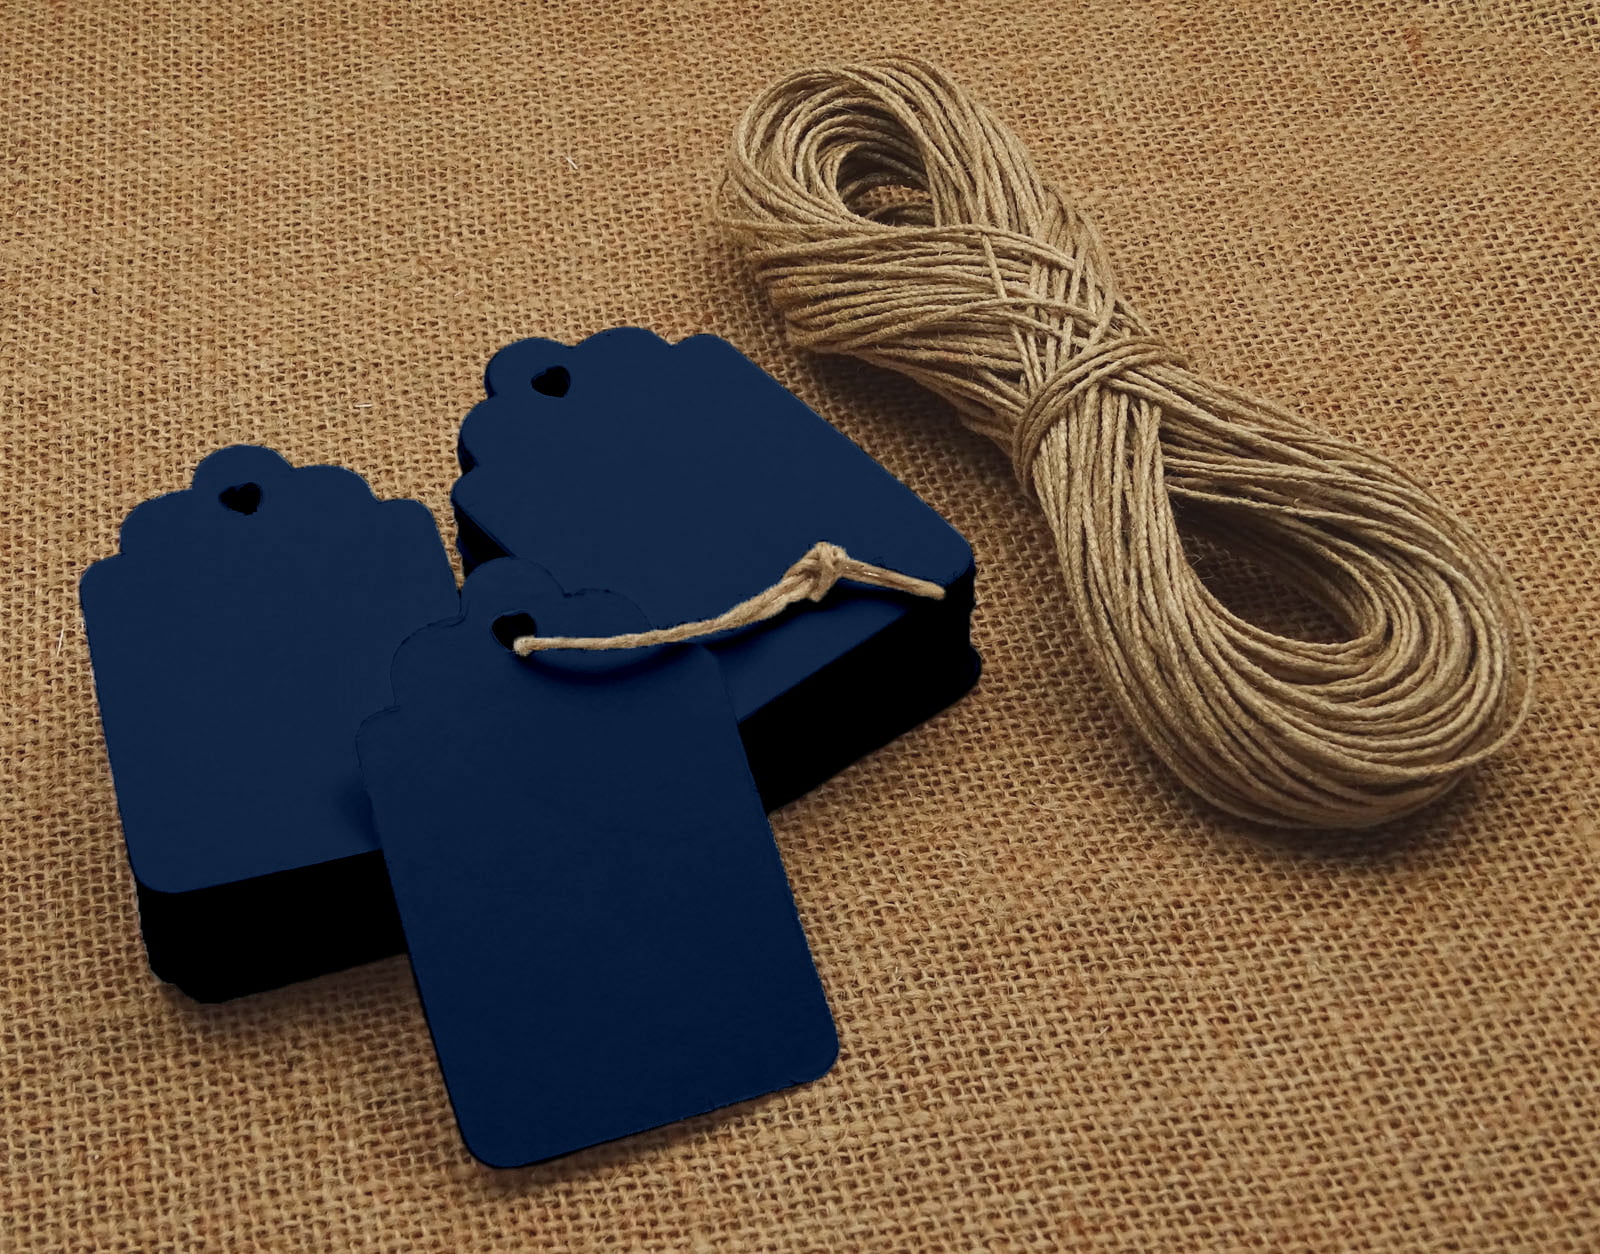 100 Pcs Rectangular Shape Favor Tags With Free Natural Jute Twine TAG-145 